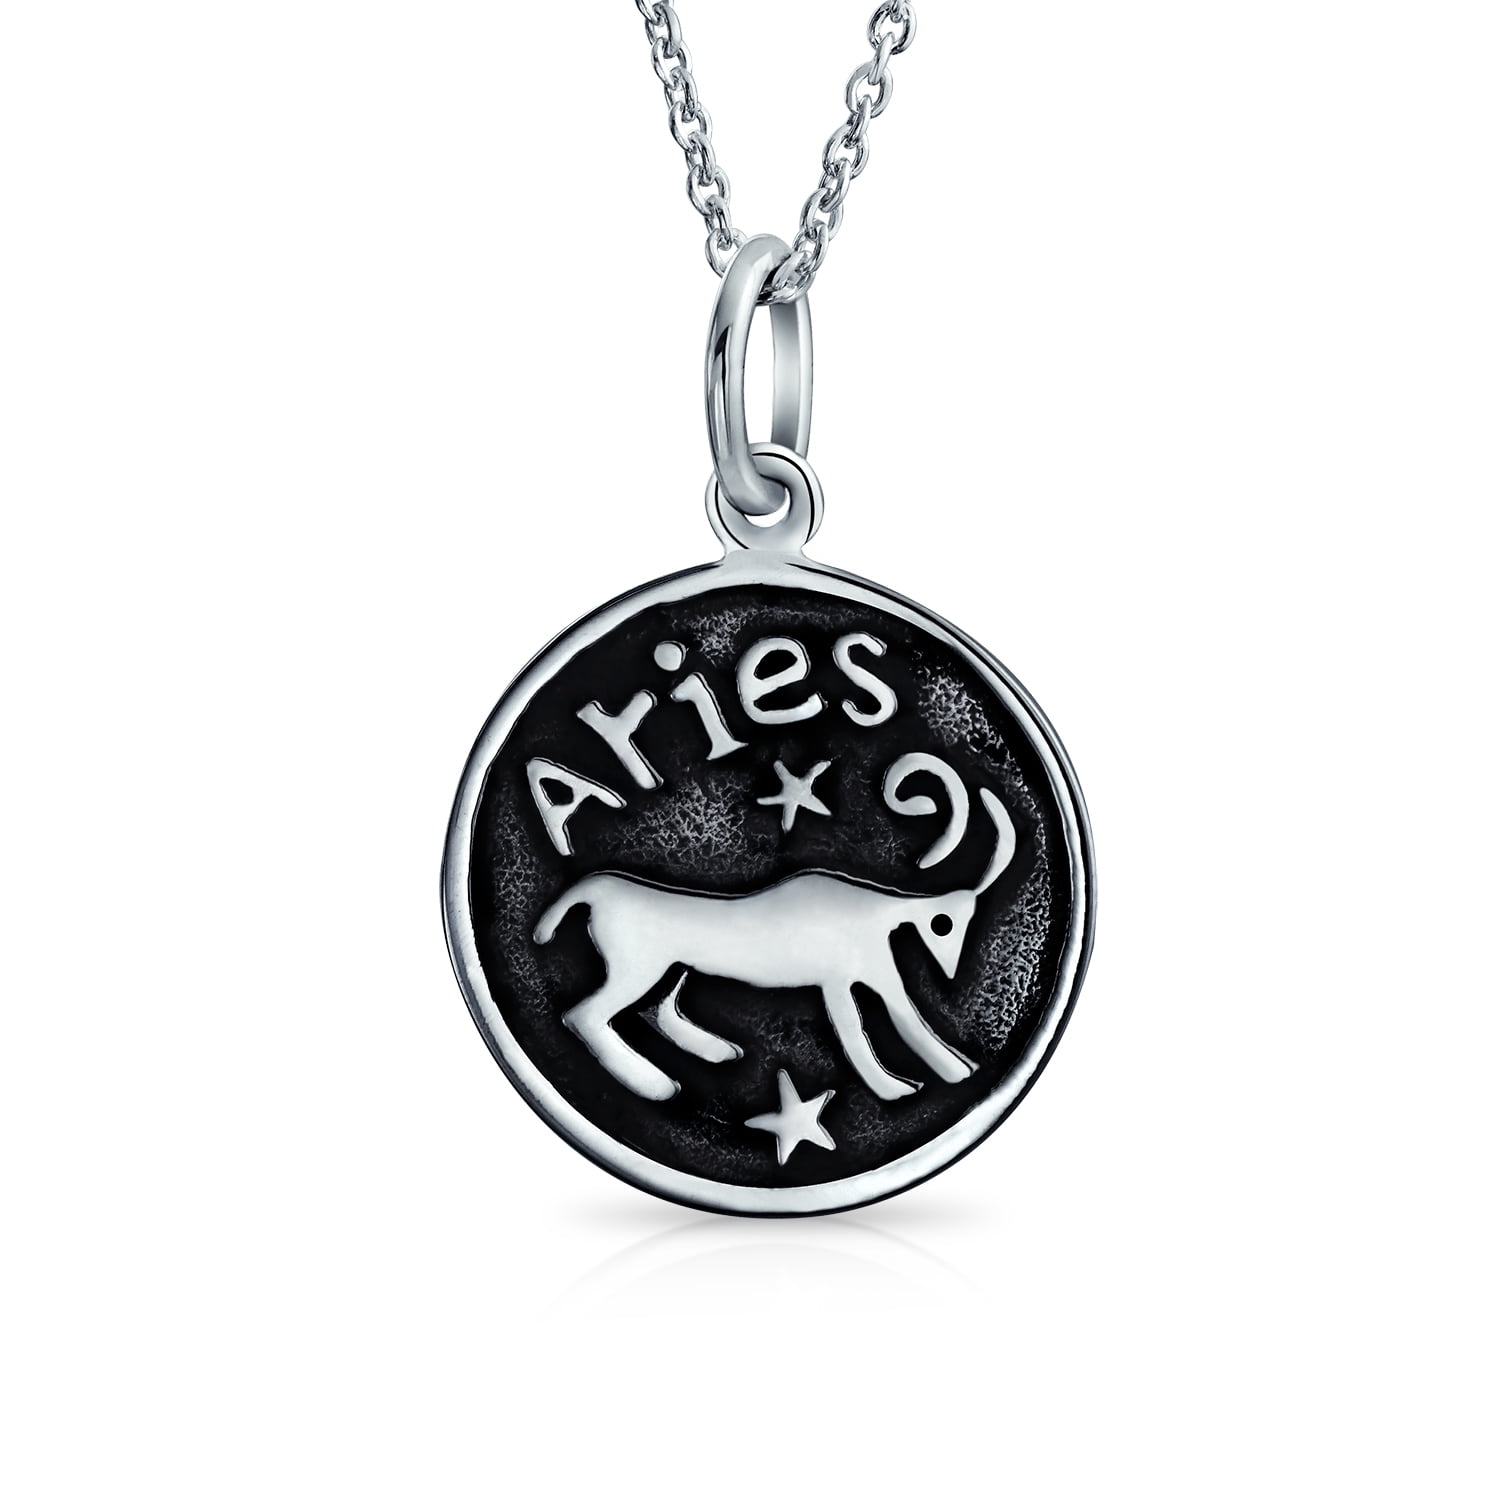 Solid Sterling Silver Round Aries Zodiac Sign Pendant Necklace 